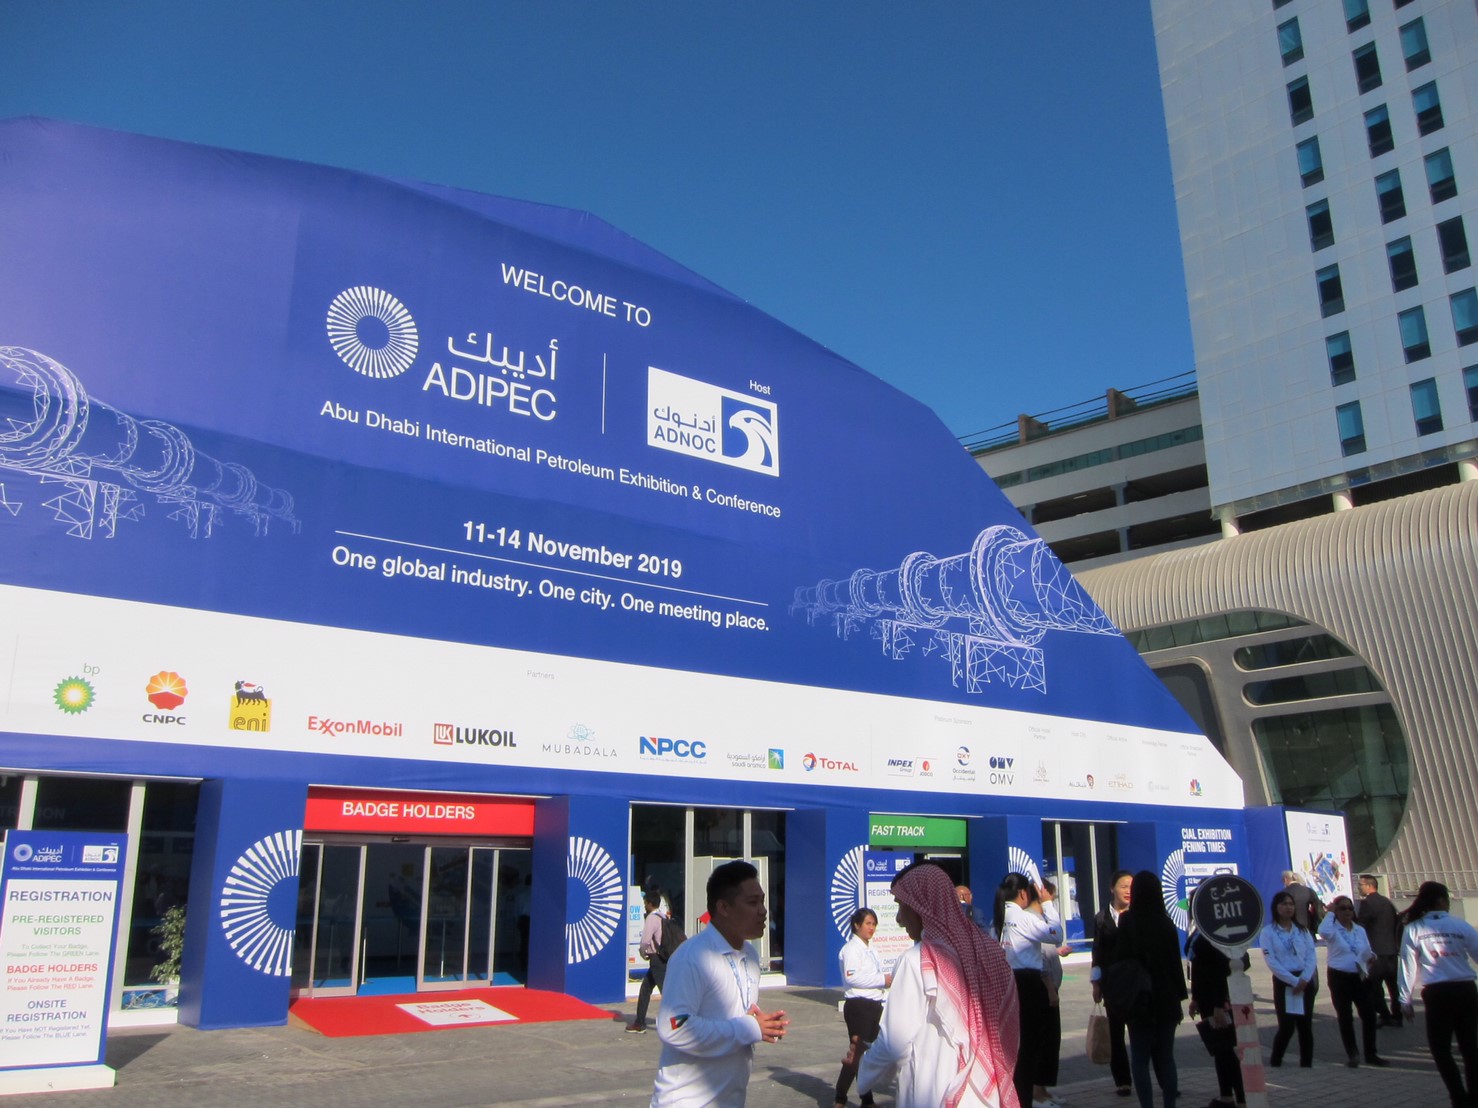 Second Day of ADIPEC 2019 in Abu Dhabi.